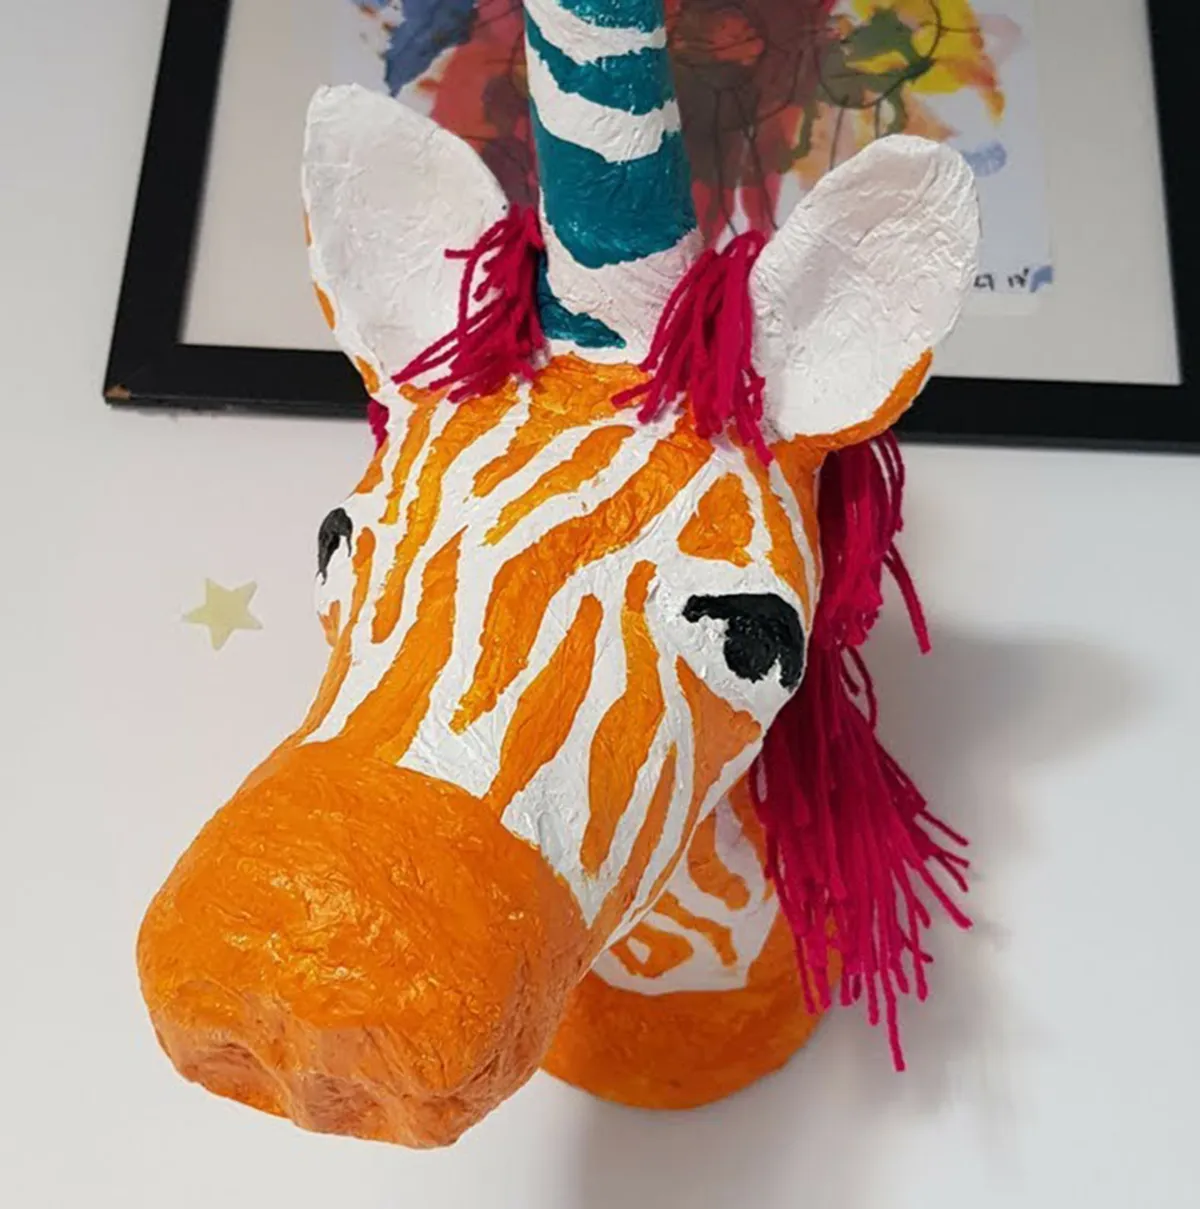 Paper Mache Projects and Recipes for the Whole Family